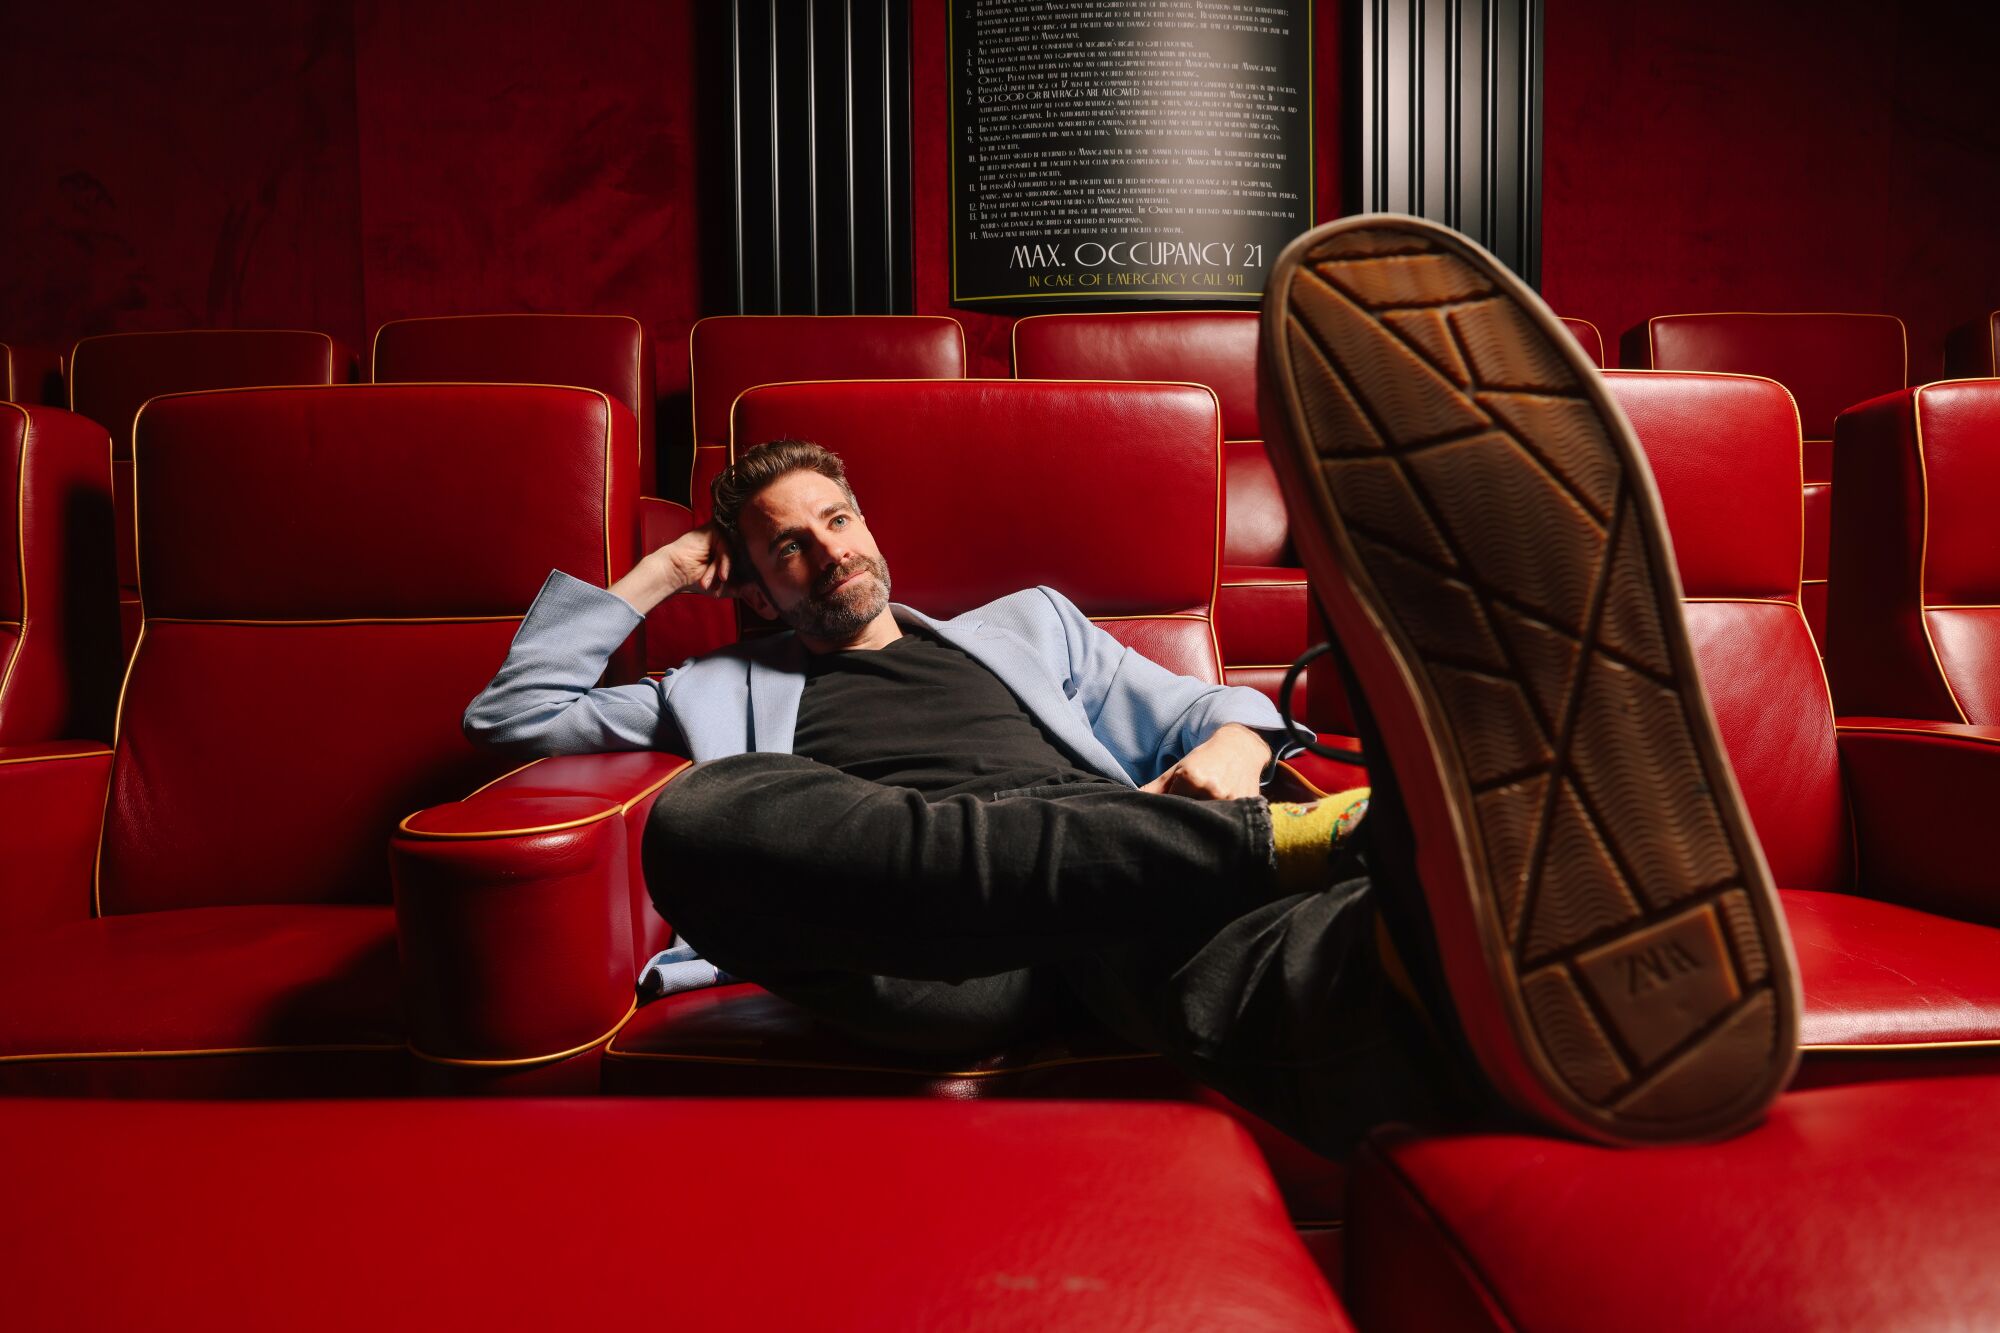 Ben Whitehair reclines  in a theater, foot kicked up in the foreground.